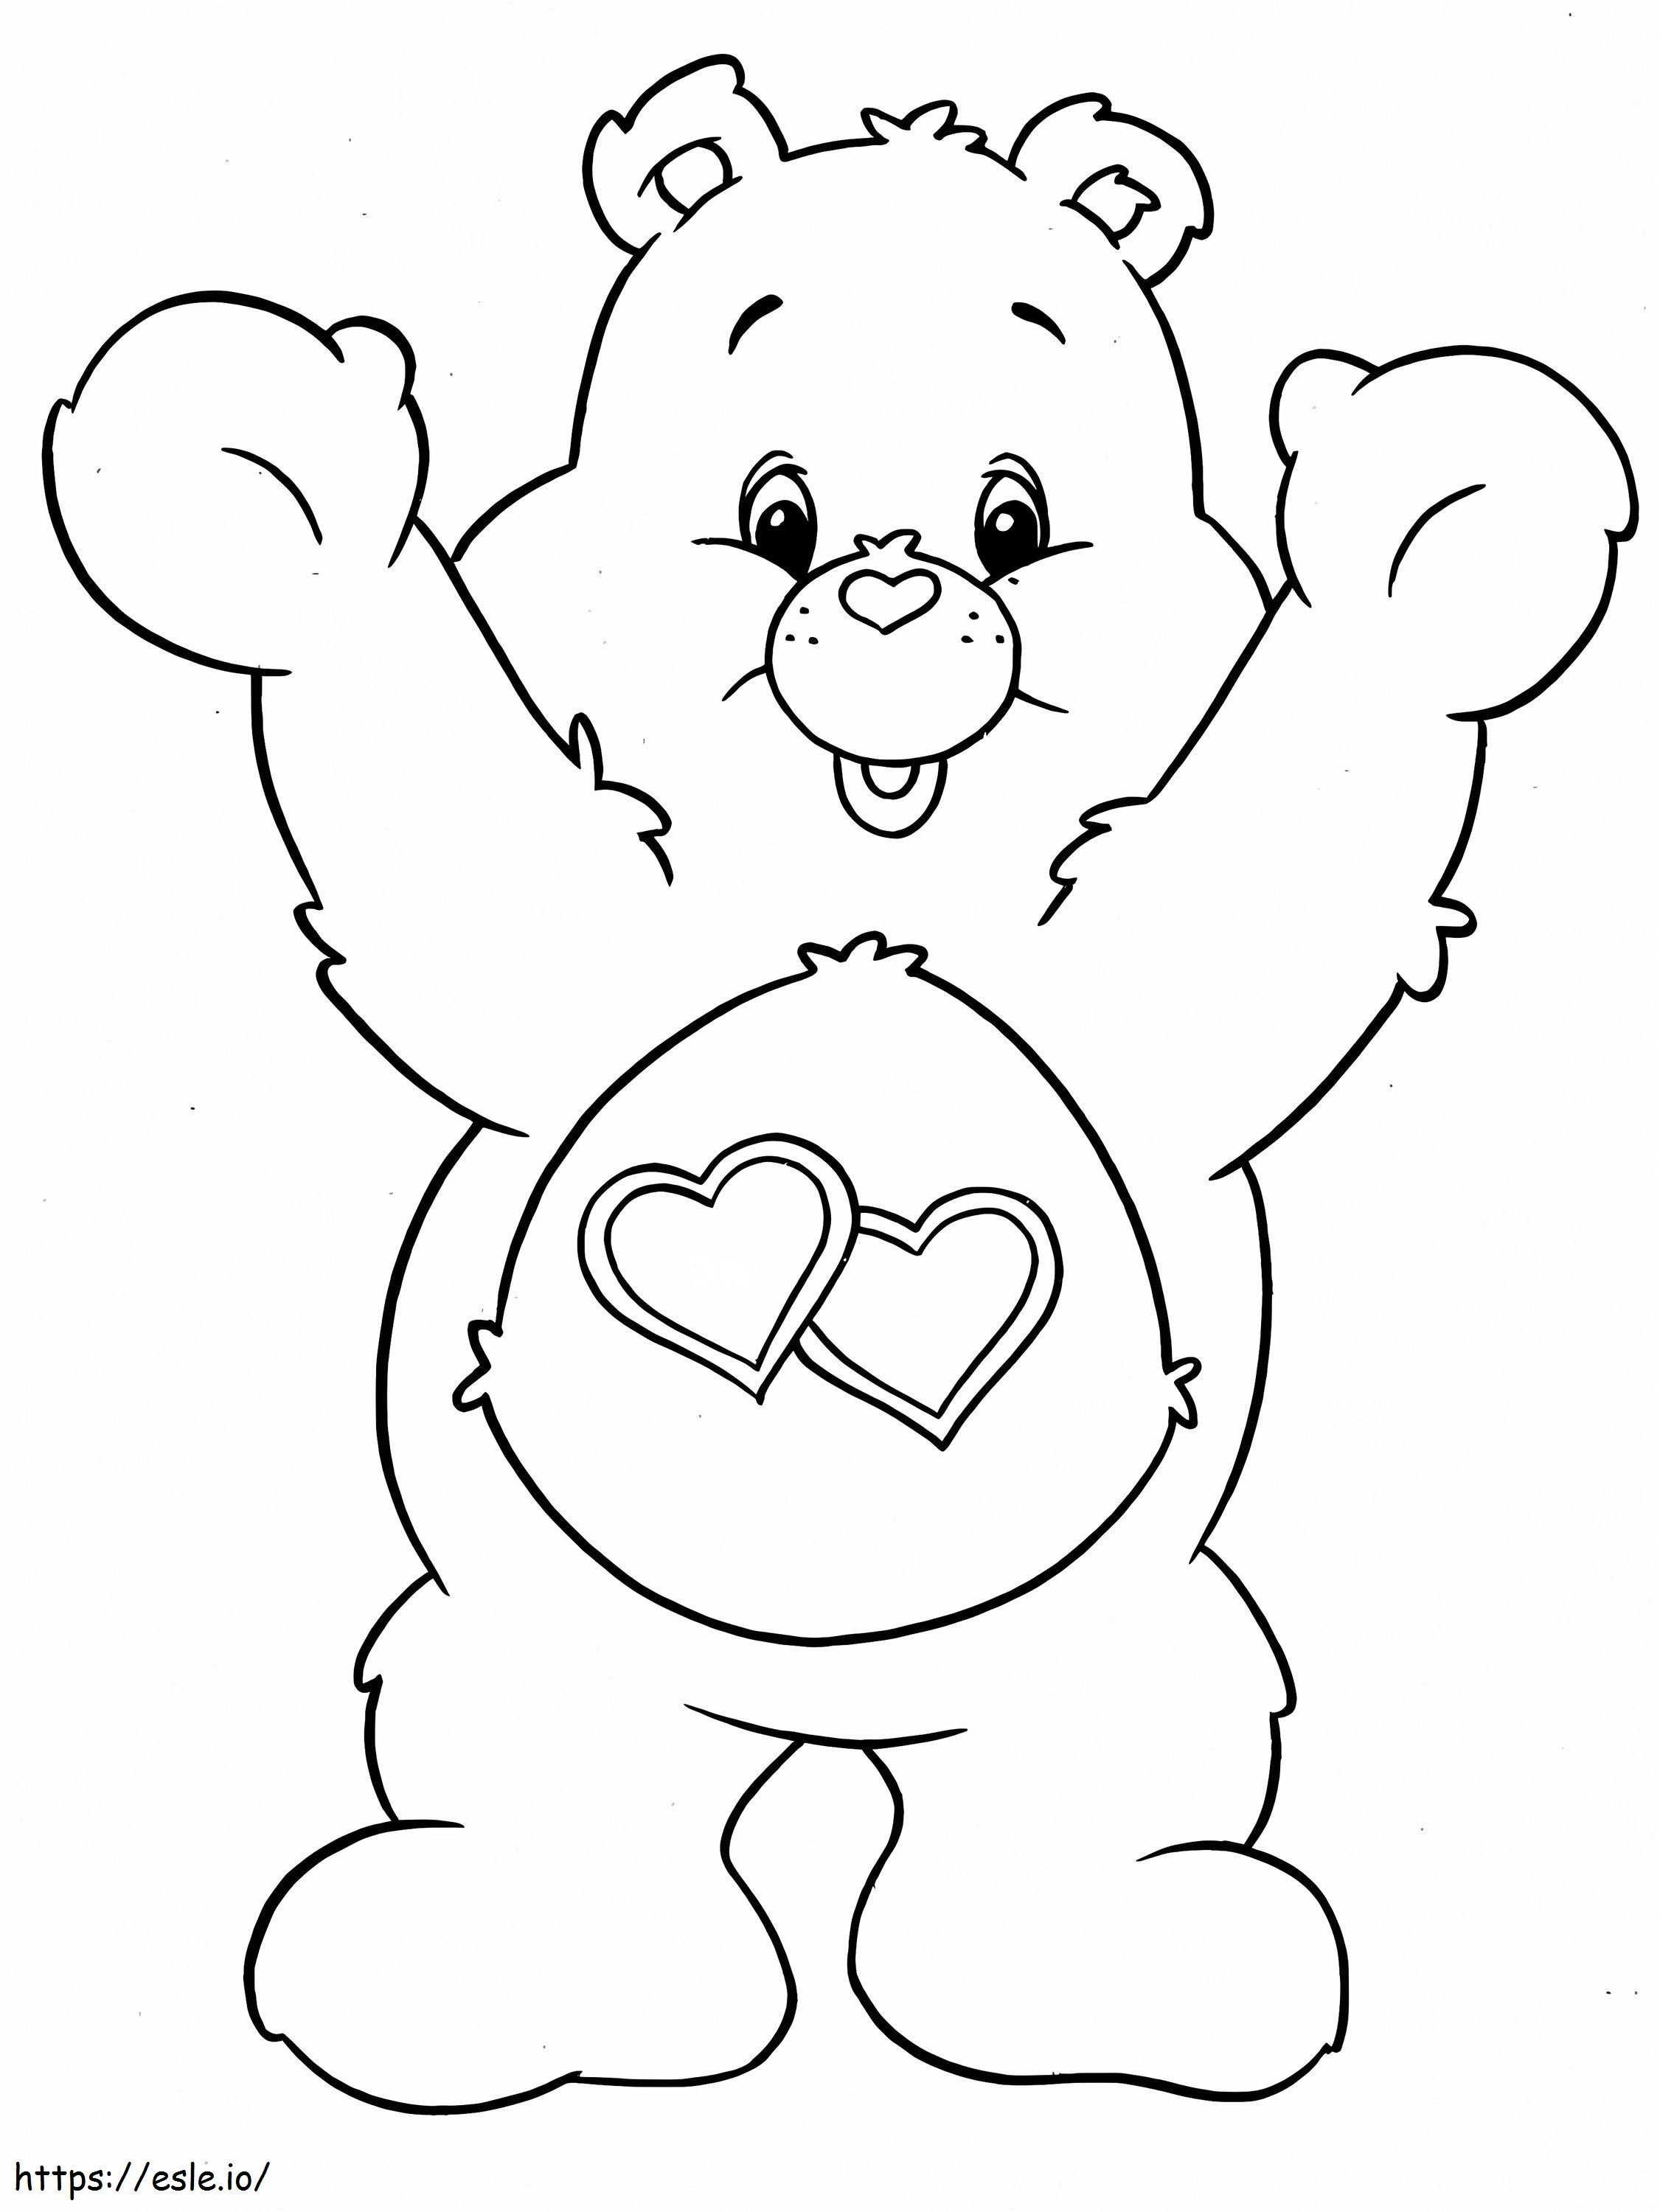 Love A Lot Bear coloring page